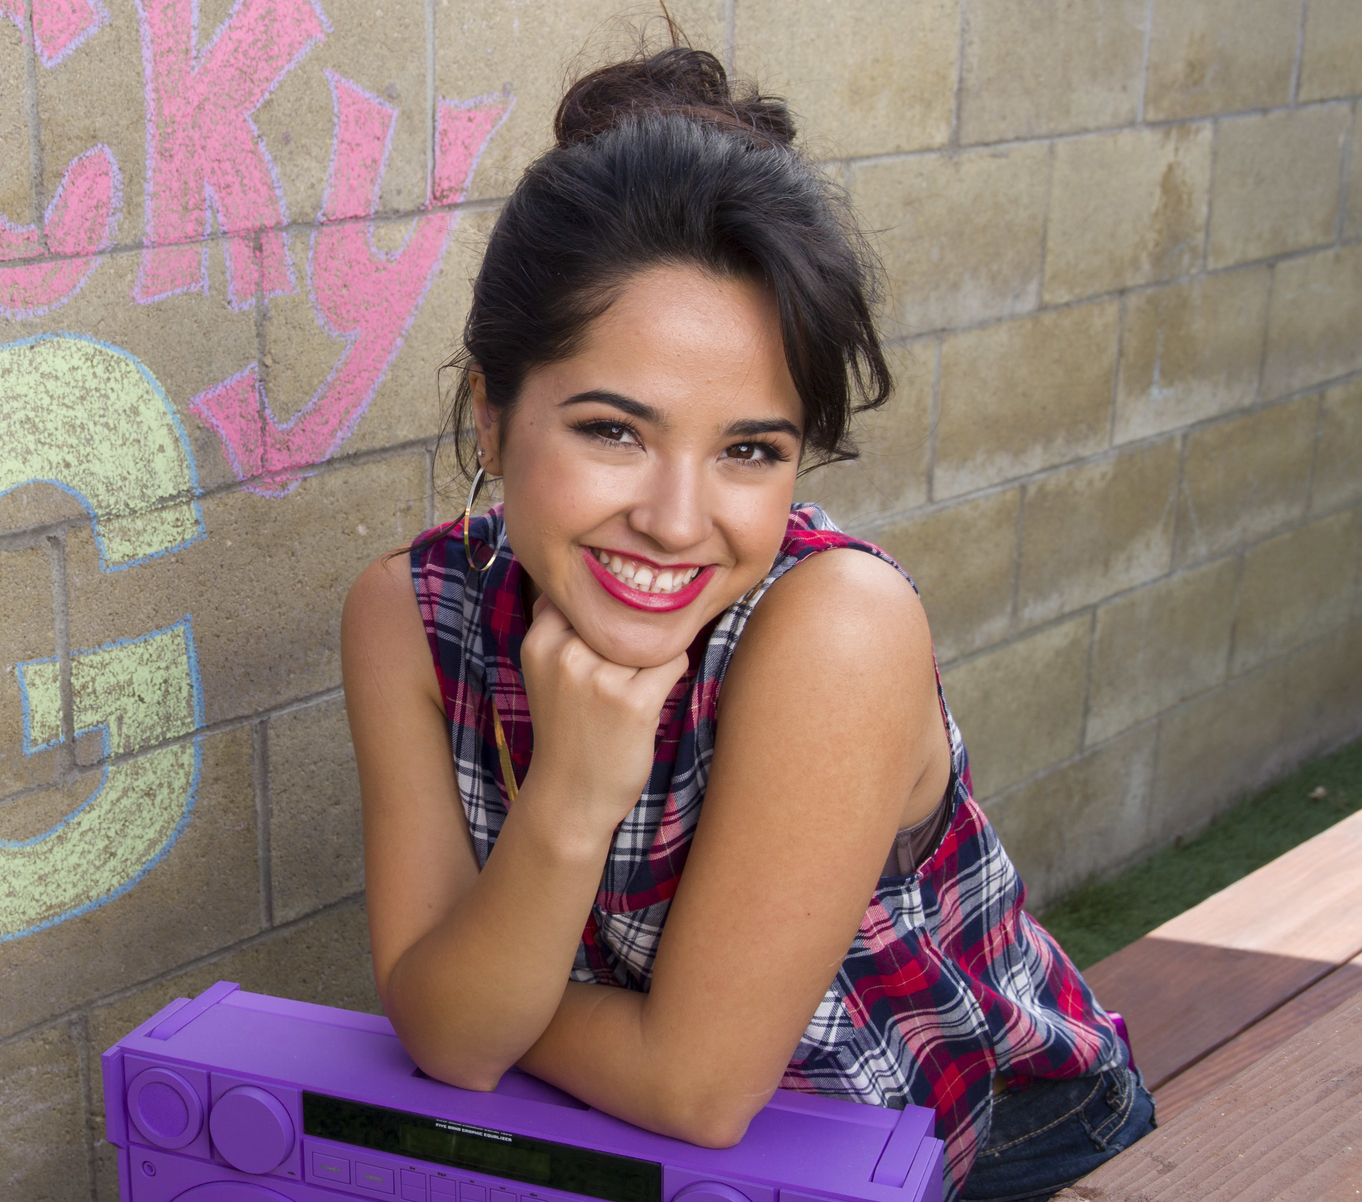 Becky G Is Going To Perform At The Radio Disney Awards